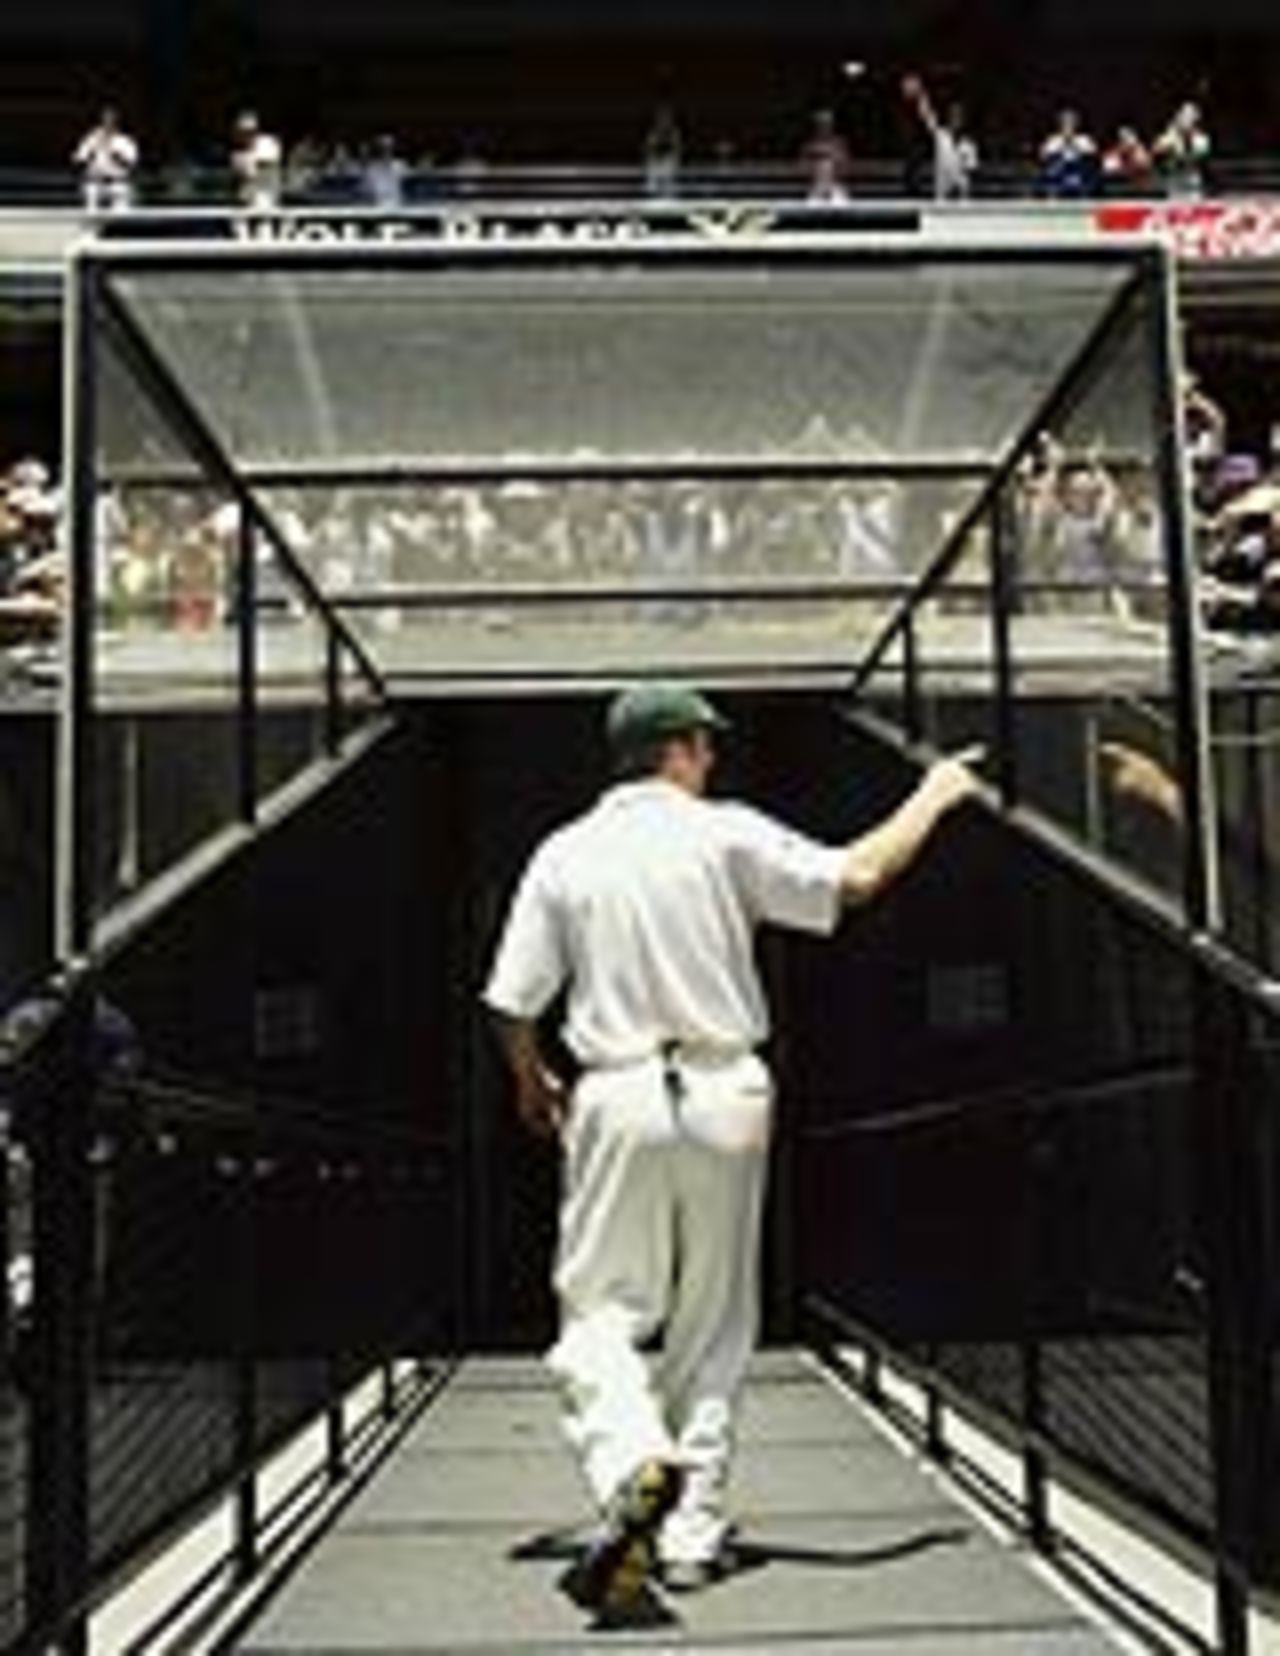 Steve Waugh makes his last walk back into the pavilion at the MCG, Australia v India, 3rd Test, Melbourne, 5th day, December 30, 2003